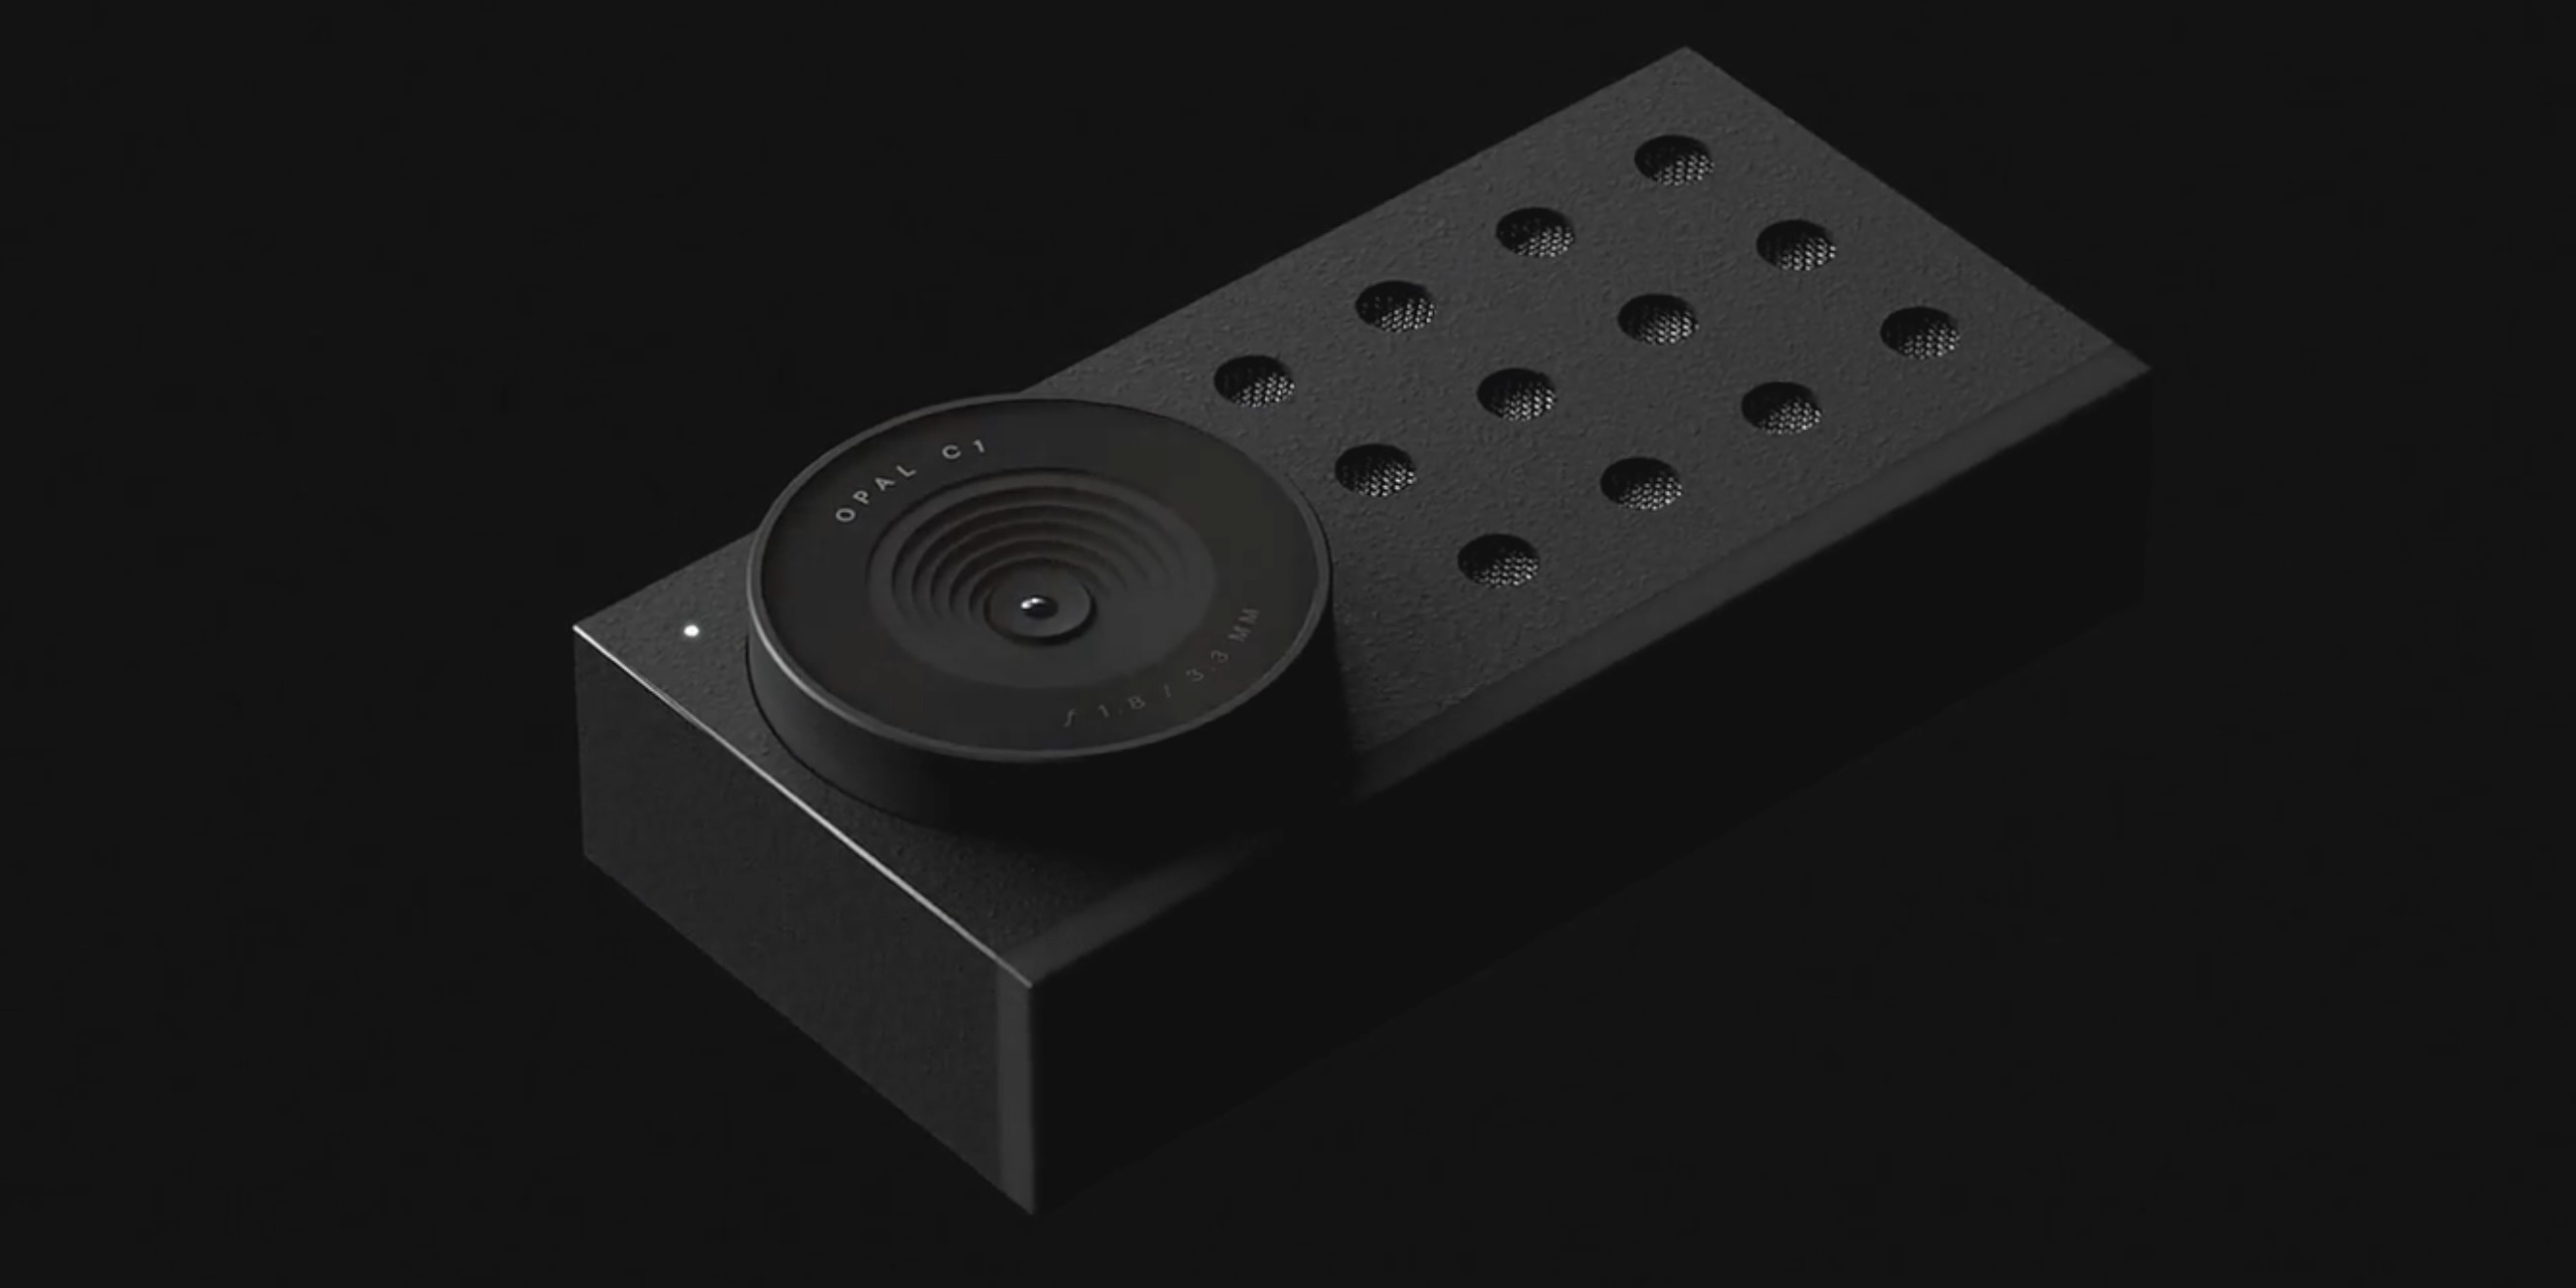 Former Apple and Beats designers launch powerful 4K webcam